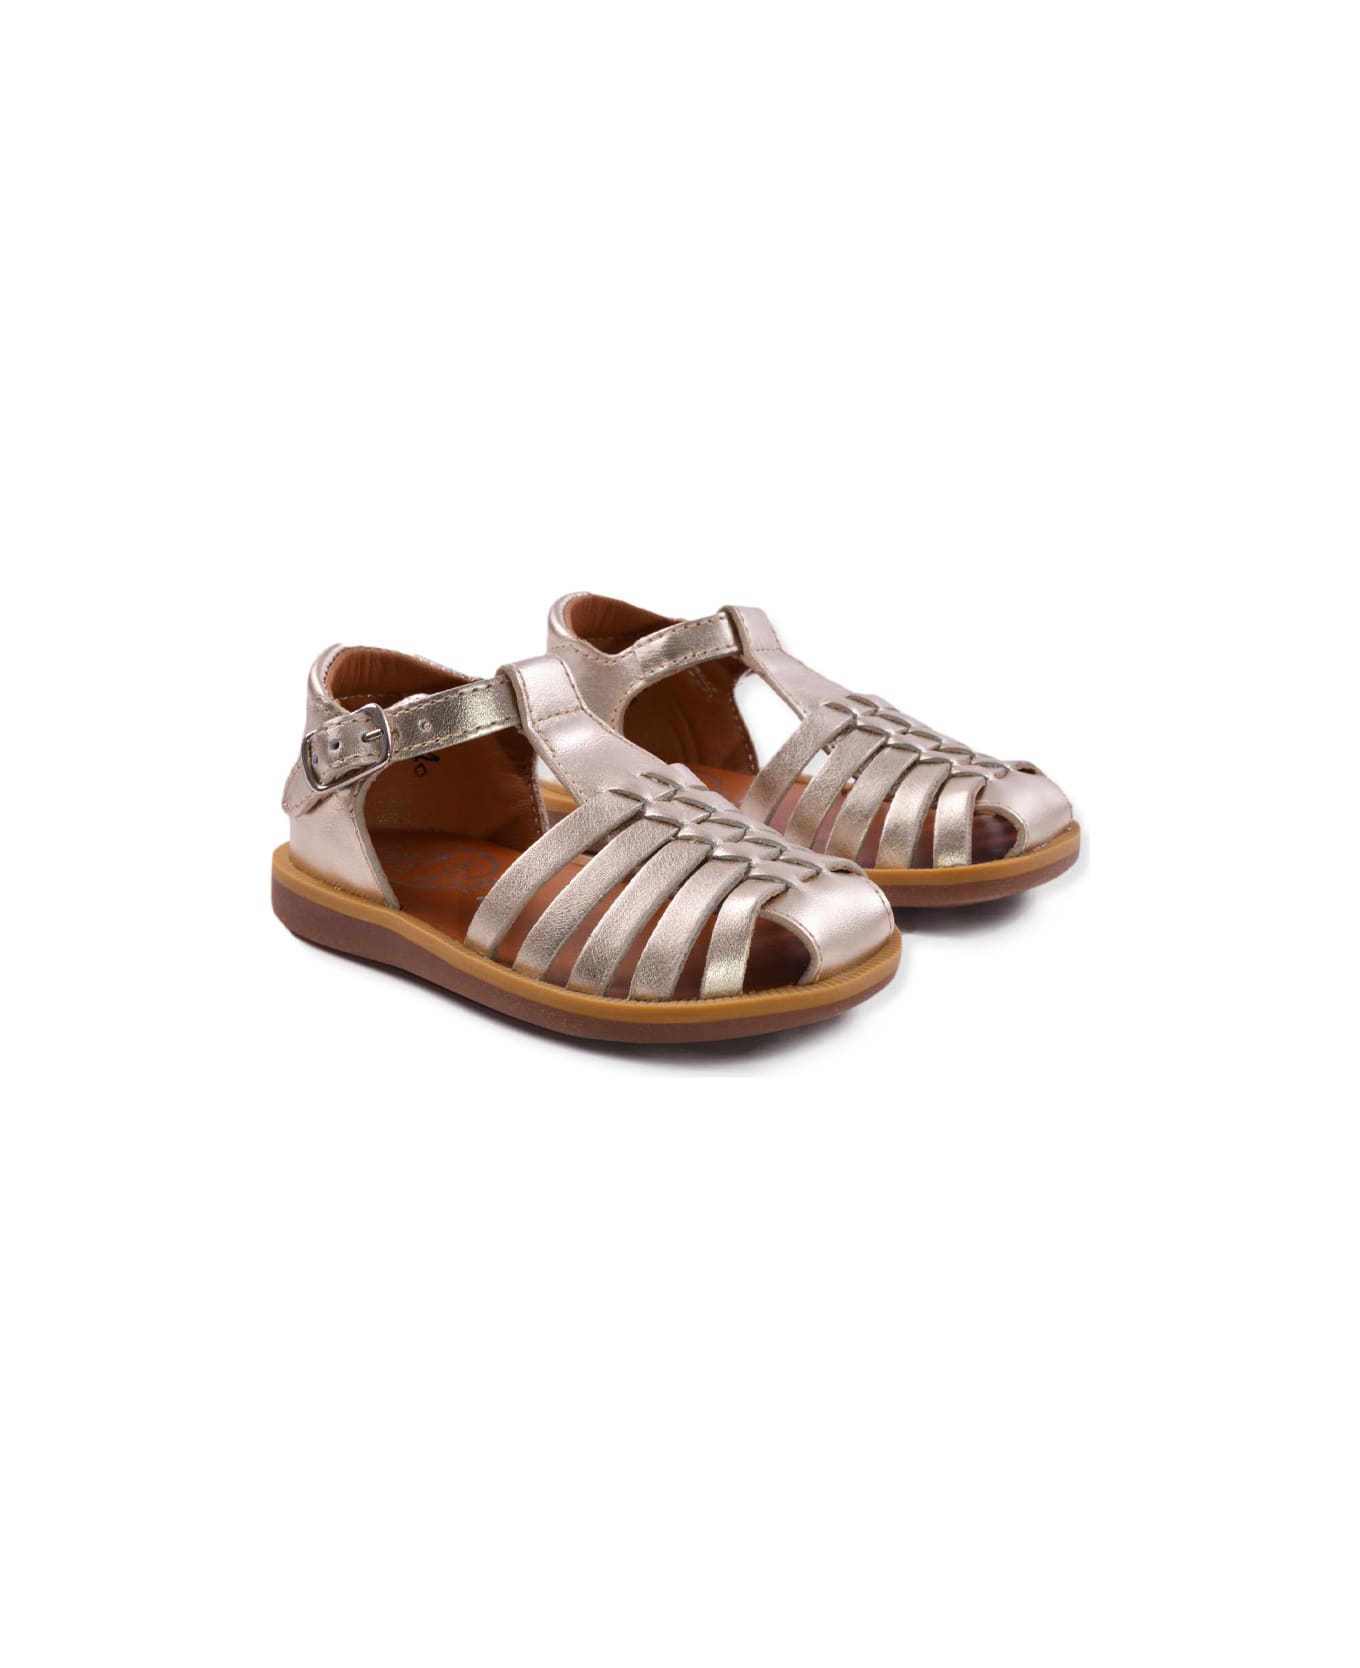 Pom d'Api Sandals In Changing Leather - Grey シューズ